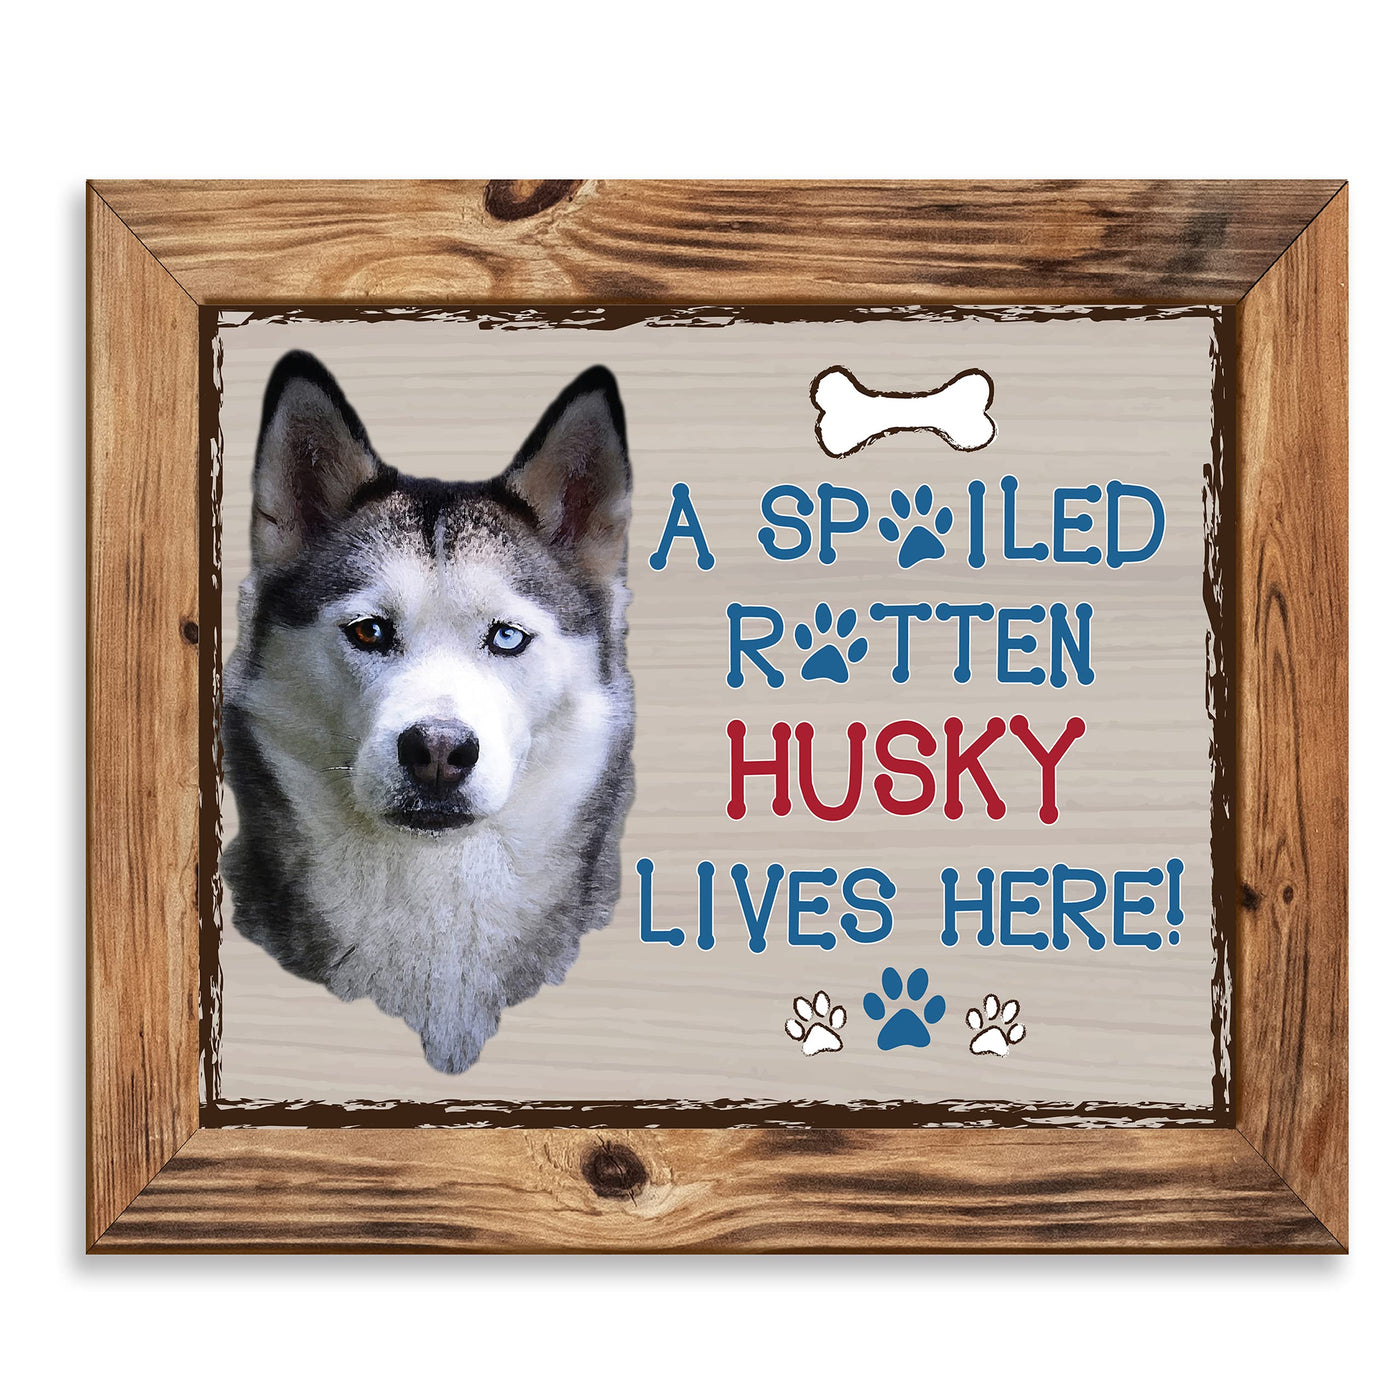 Siberian Husky-Dog Poster Print-10 x 8" Wall Decor Sign-Ready To Frame."A Spoiled Rotten Husky Lives Here". Perfect Pet Wall Art for Home-Kitchen-Cave-Bar-Garage. Great Gift for Siberian Husky Fans!